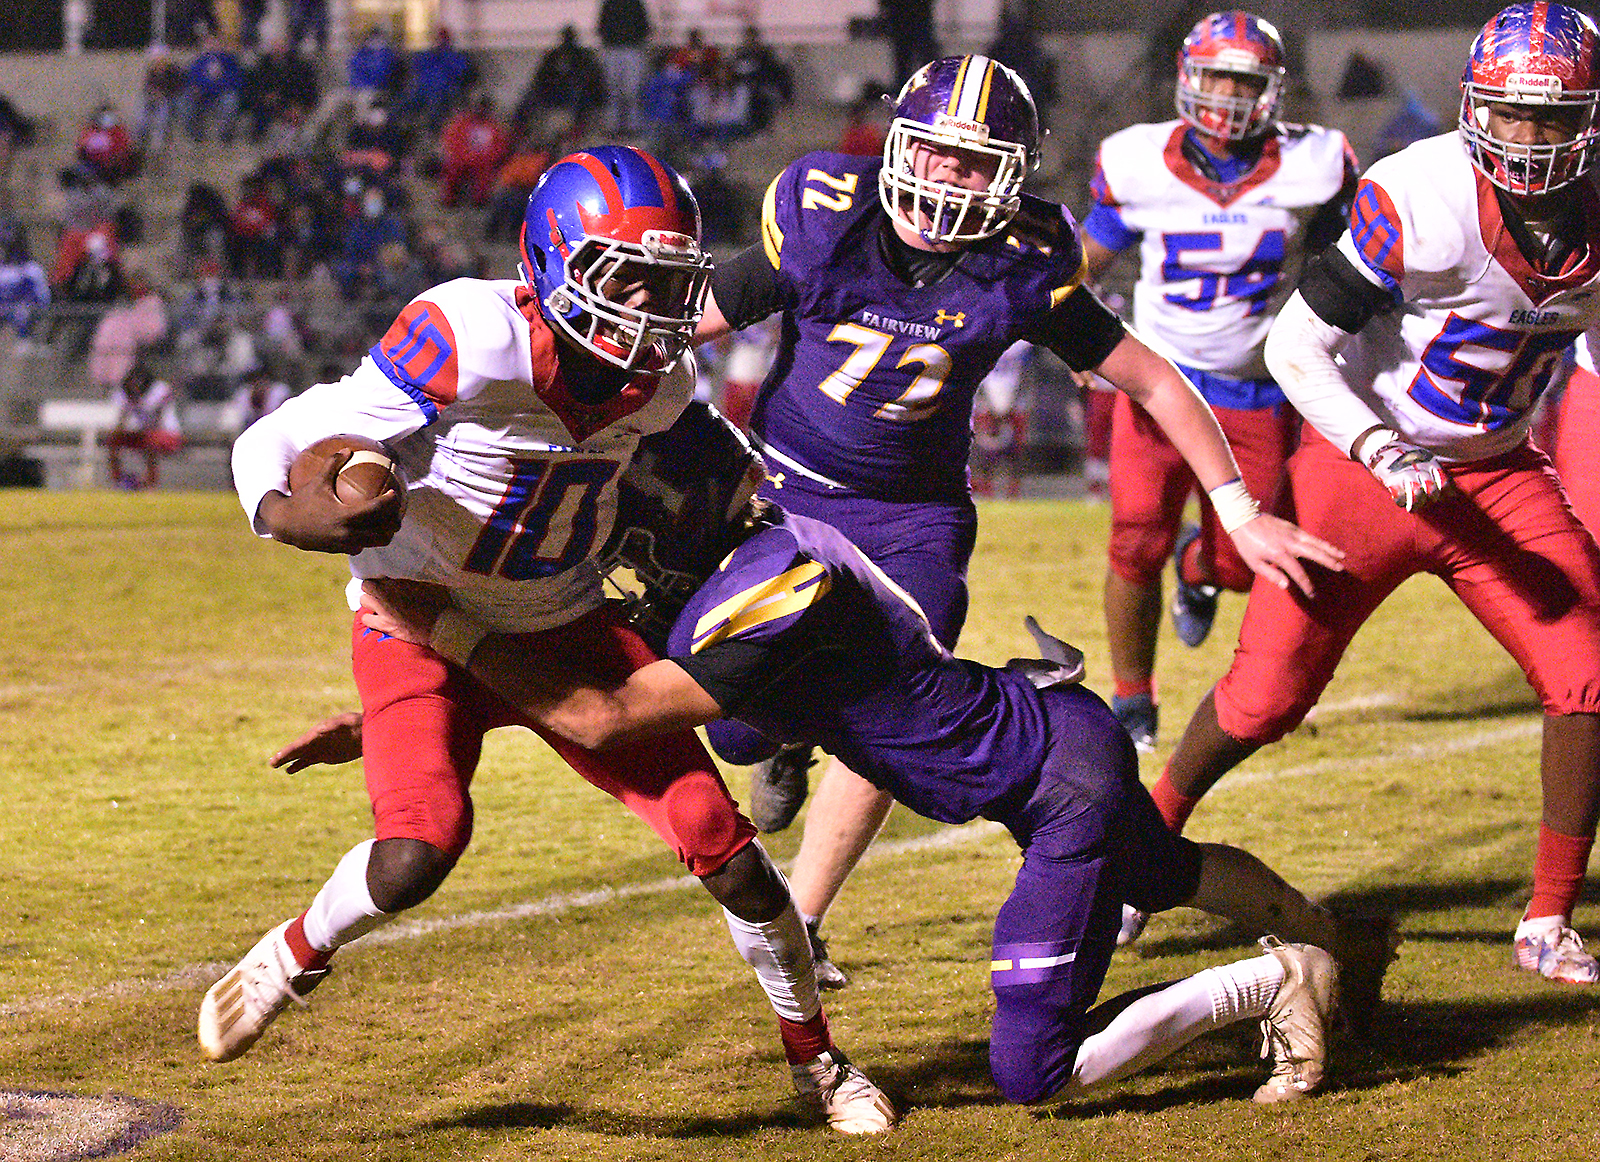 Center Point falls to No. 10 Fairview in playoff opener